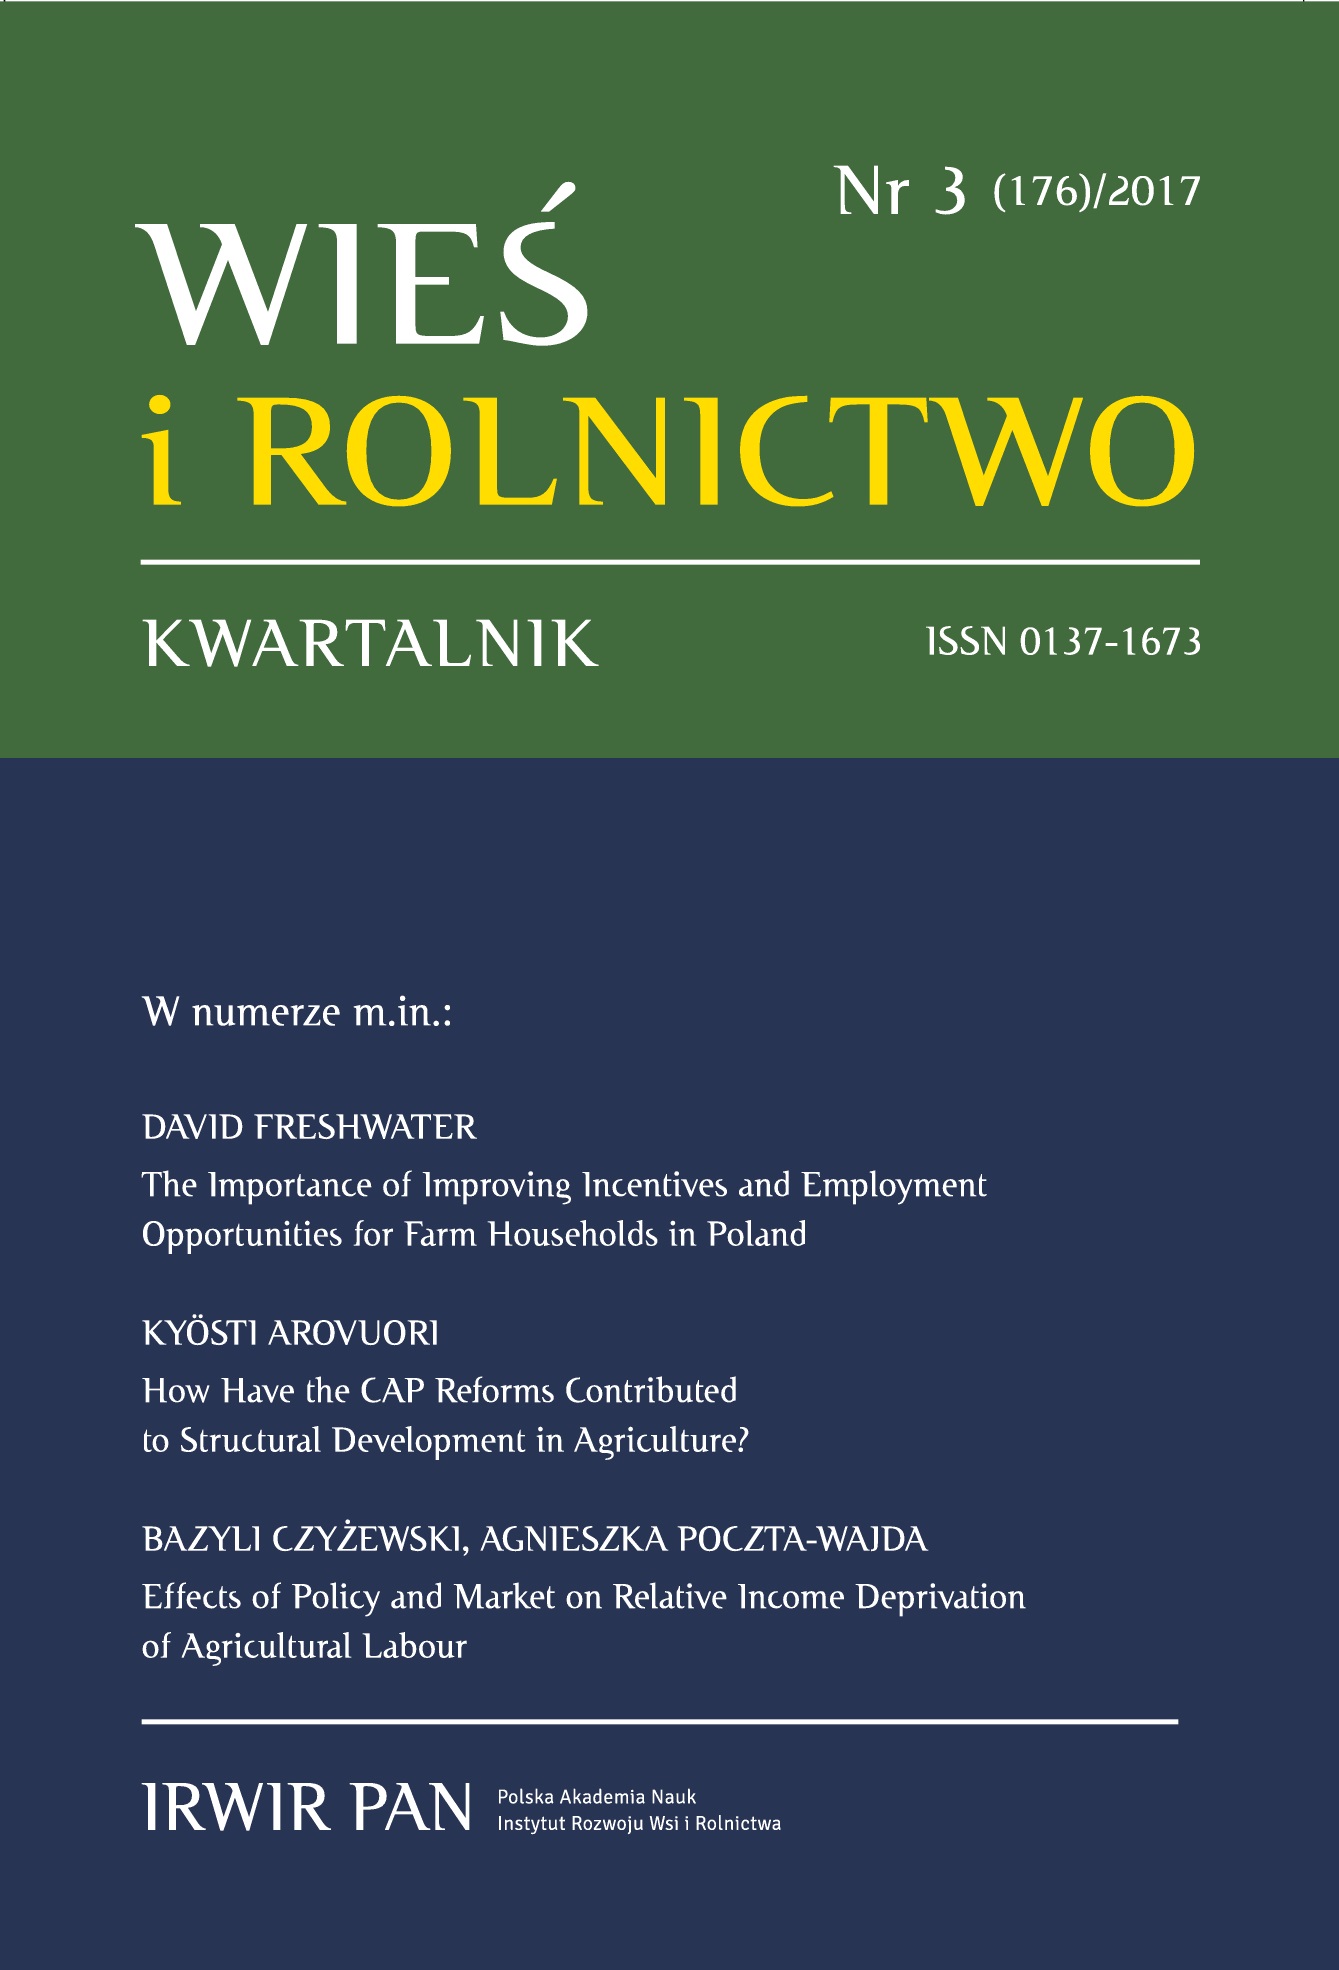 Renewable Energy – Implications for Agriculture and Rural Development in Poland